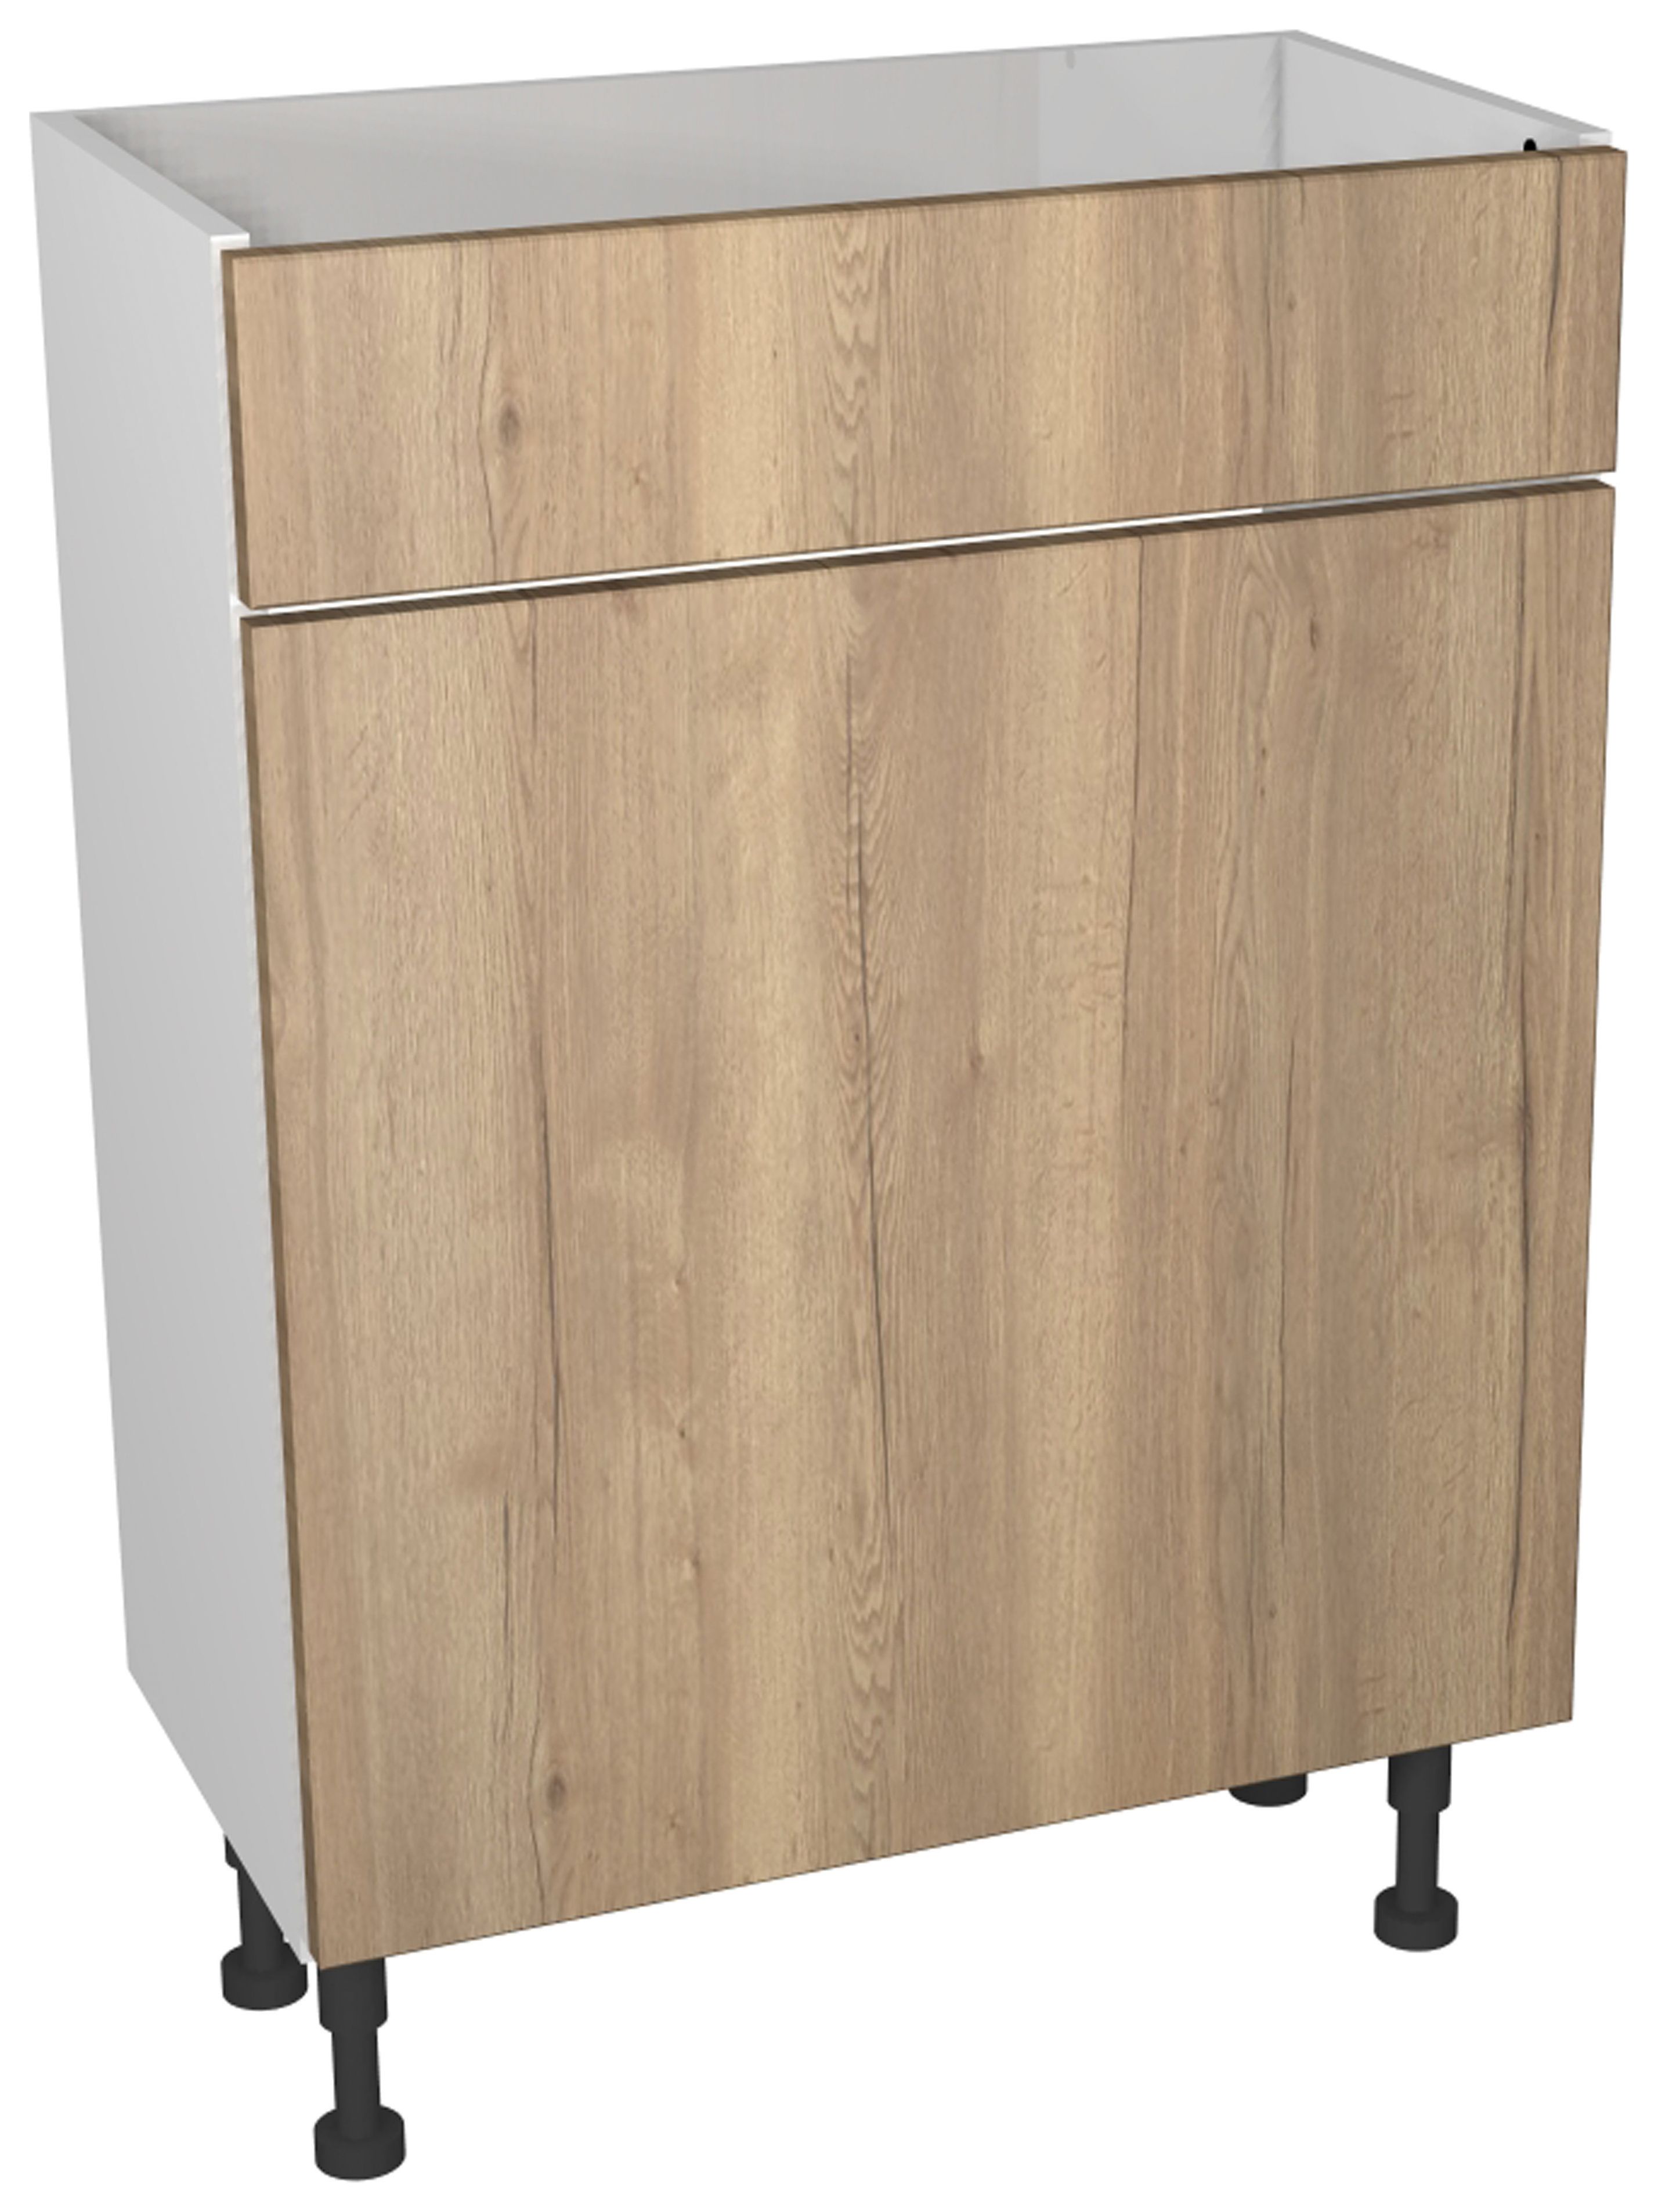 Image of Wickes Vienna Oak Compact WC Unit - 600 x 735mm